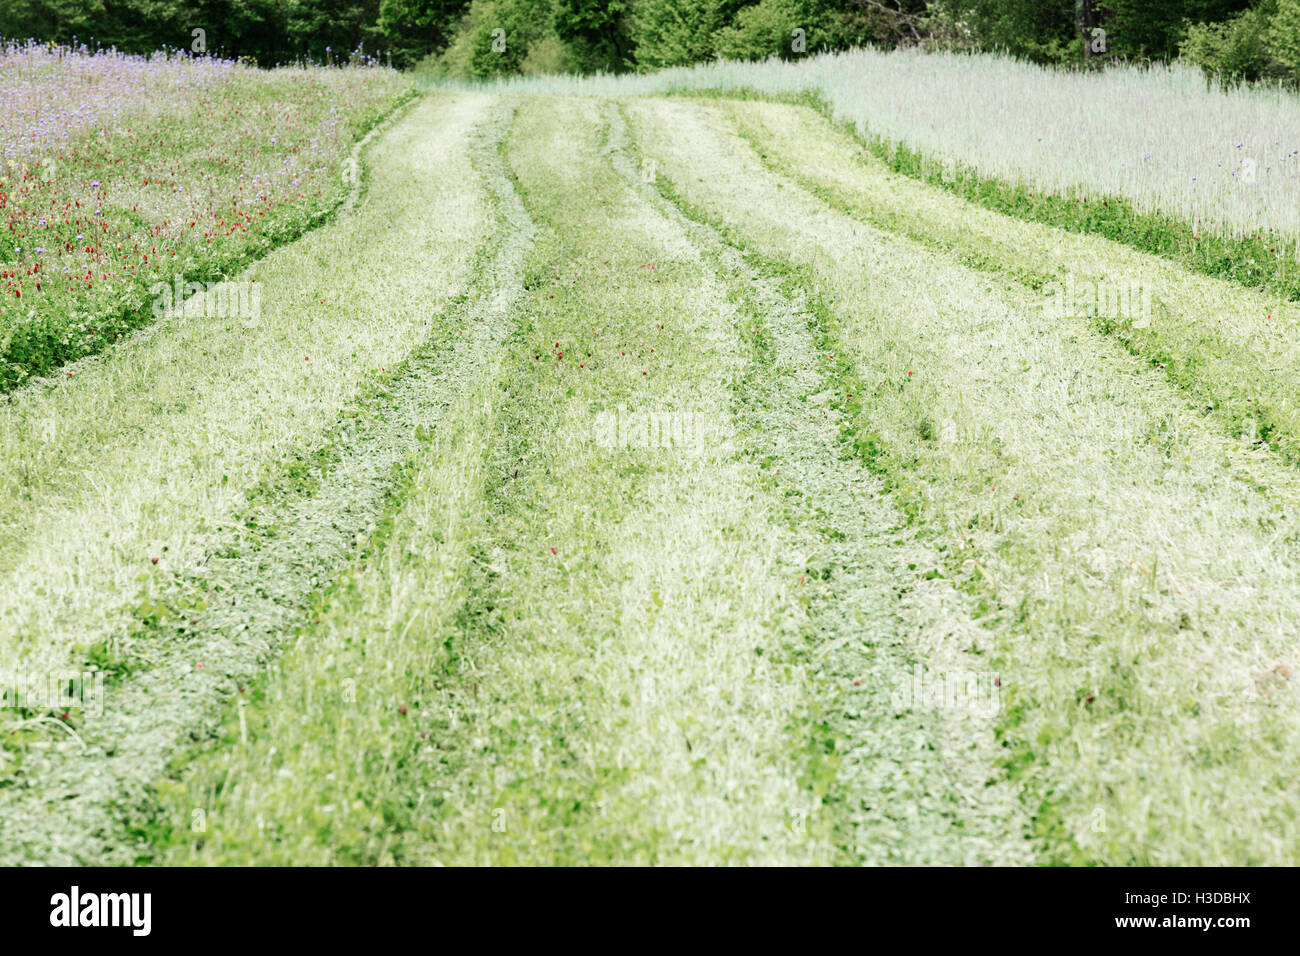 A swathe of cut grass, a path through tall grasses and flowers in a field. Stock Photo